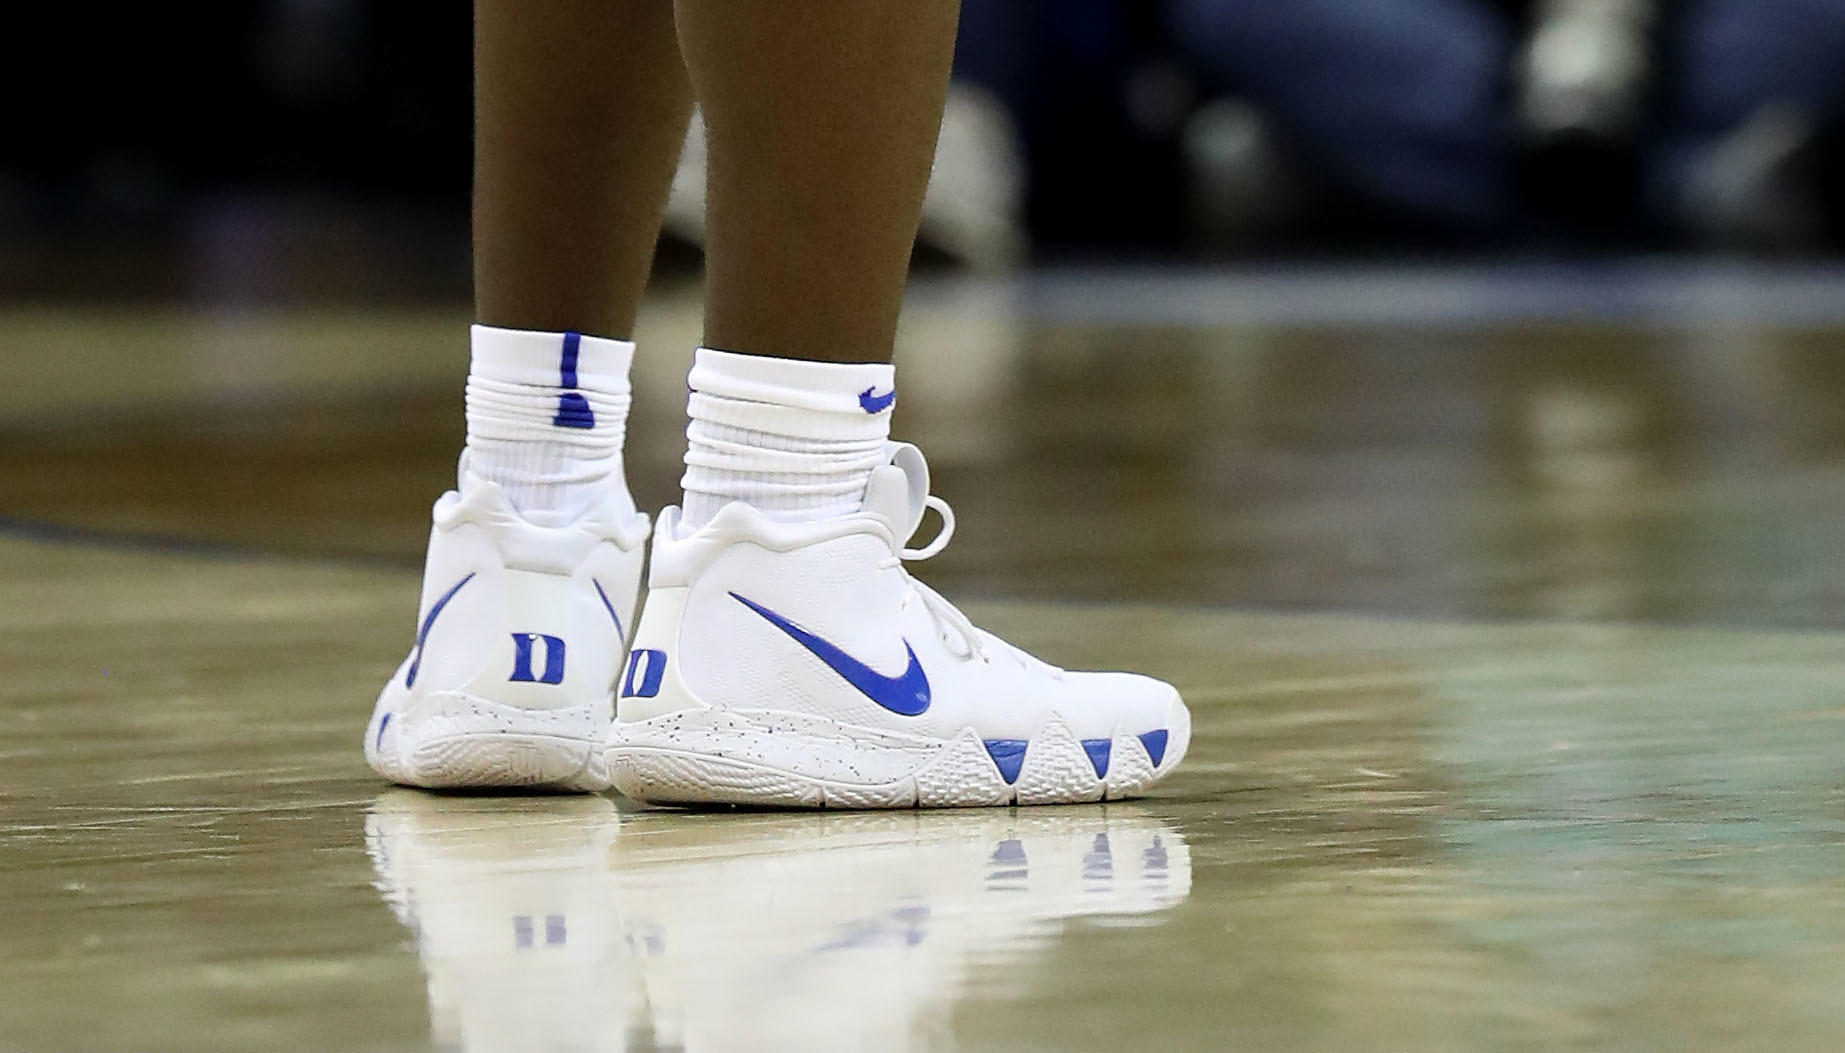 Nike sent a team to China to fix Zion Williamson's sneakers - Chicago Tribune